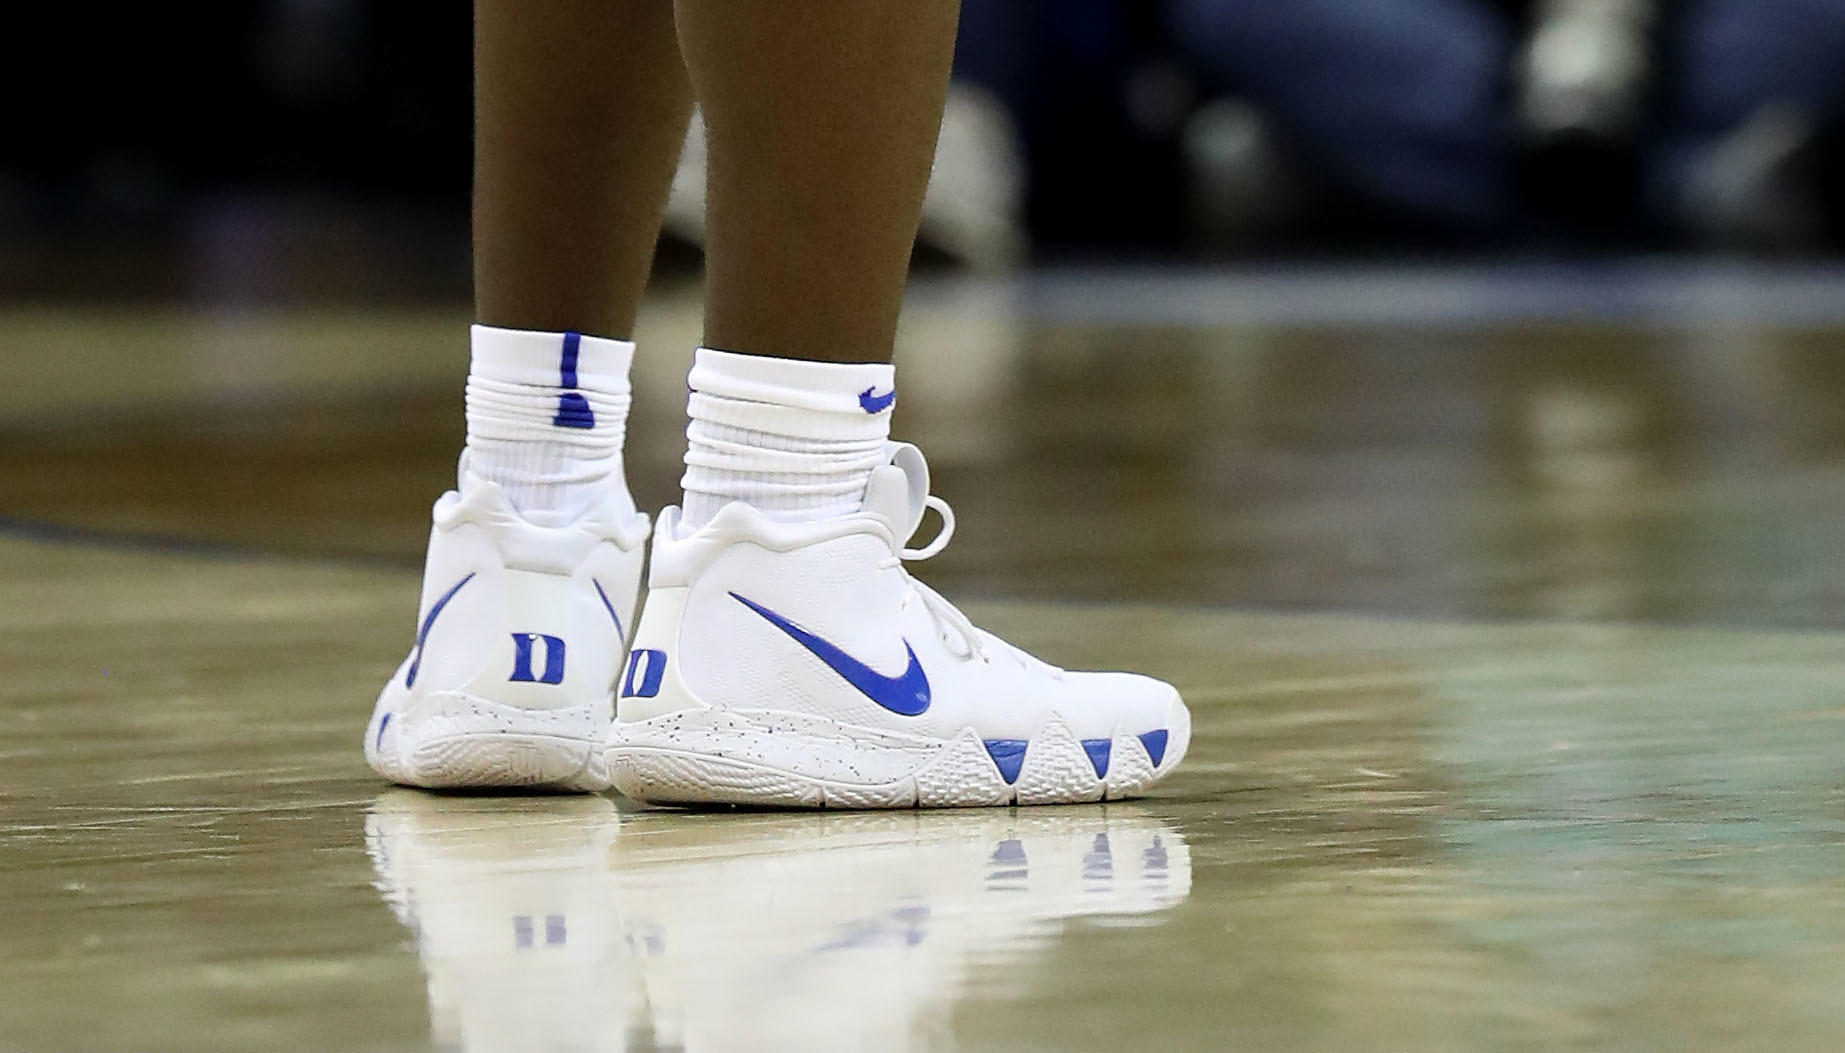 Nike sent a team to China to fix Zion Williamson's sneakers - Chicago Tribune